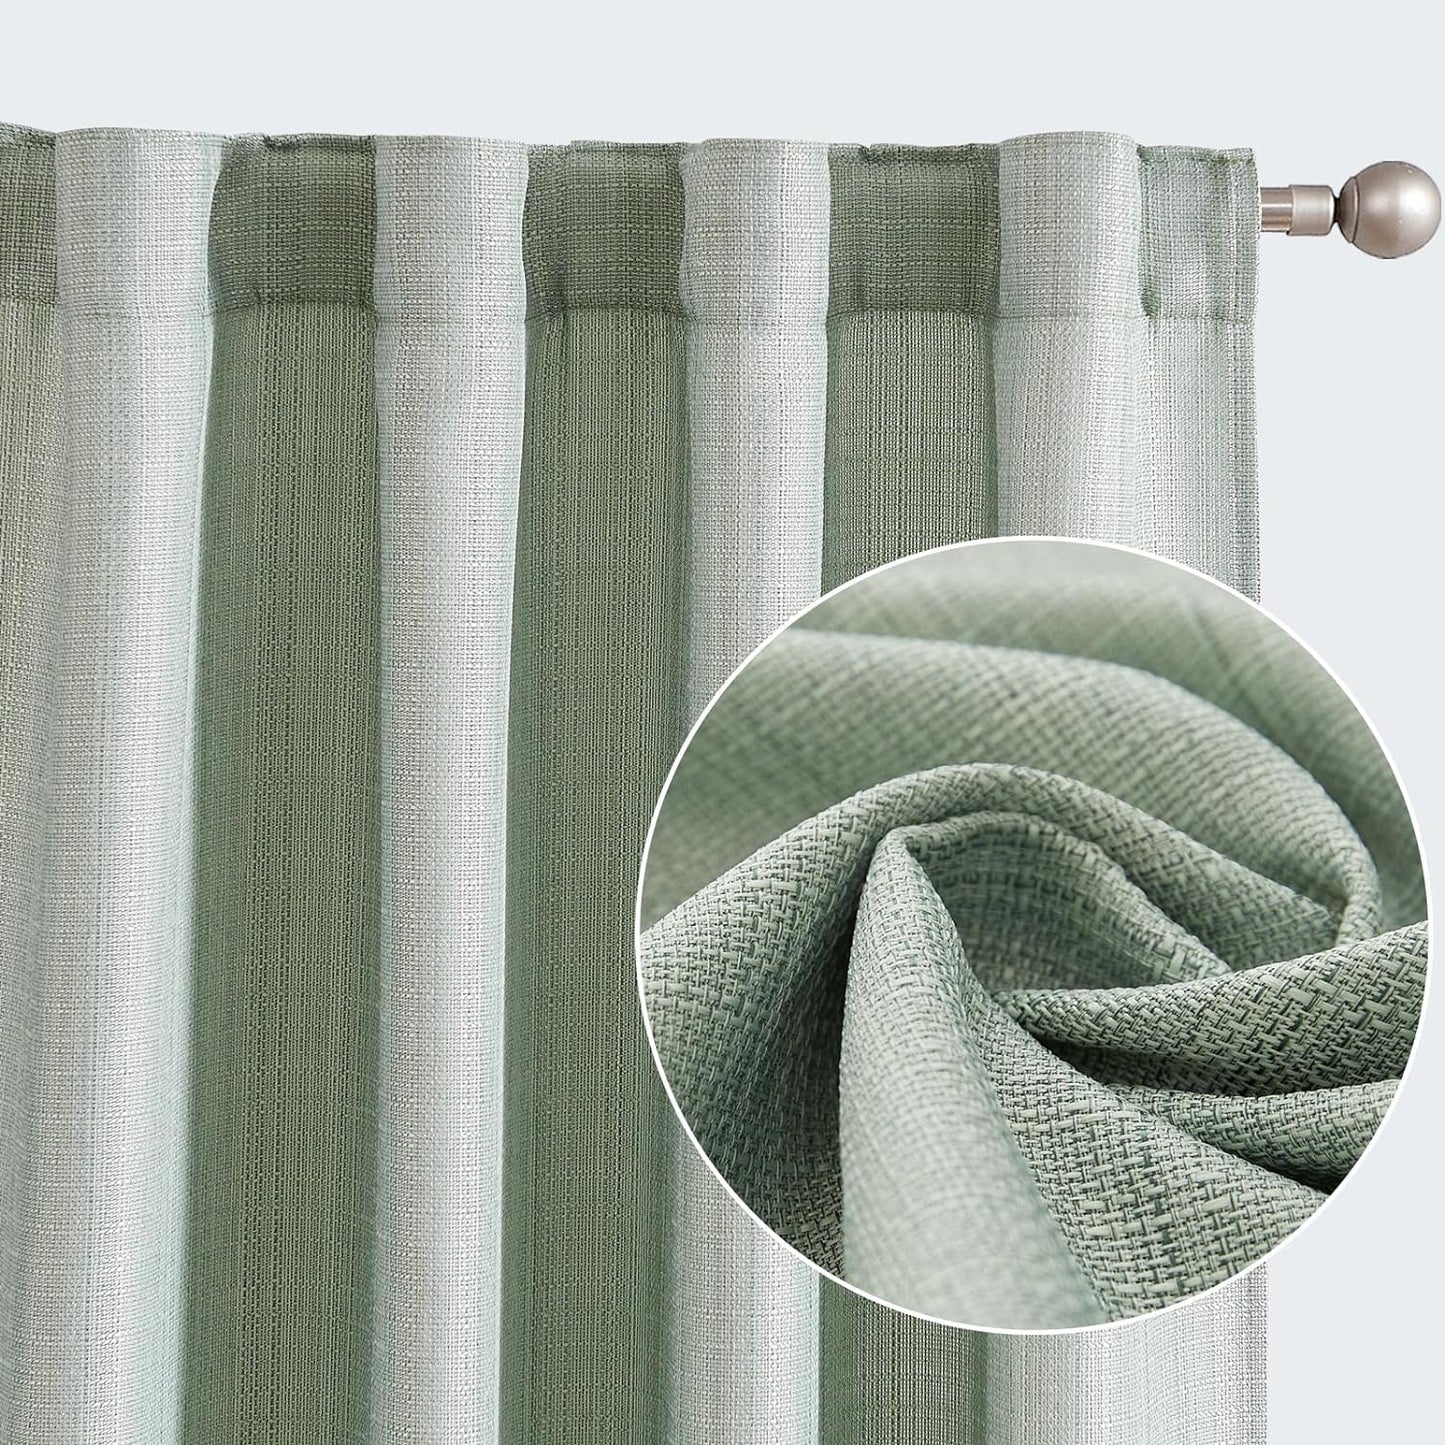 COLLACT White Linen Textured Curtains 84 Inch Length 2 Panels for Living Room Casual Weave Light Filtering Semi Sheer Curtains & Drapes for Bedroom Grommet Top Window Treatments, W38 X L84, White  COLLACT Rod Pocket | Heathered Green W38 X L96 